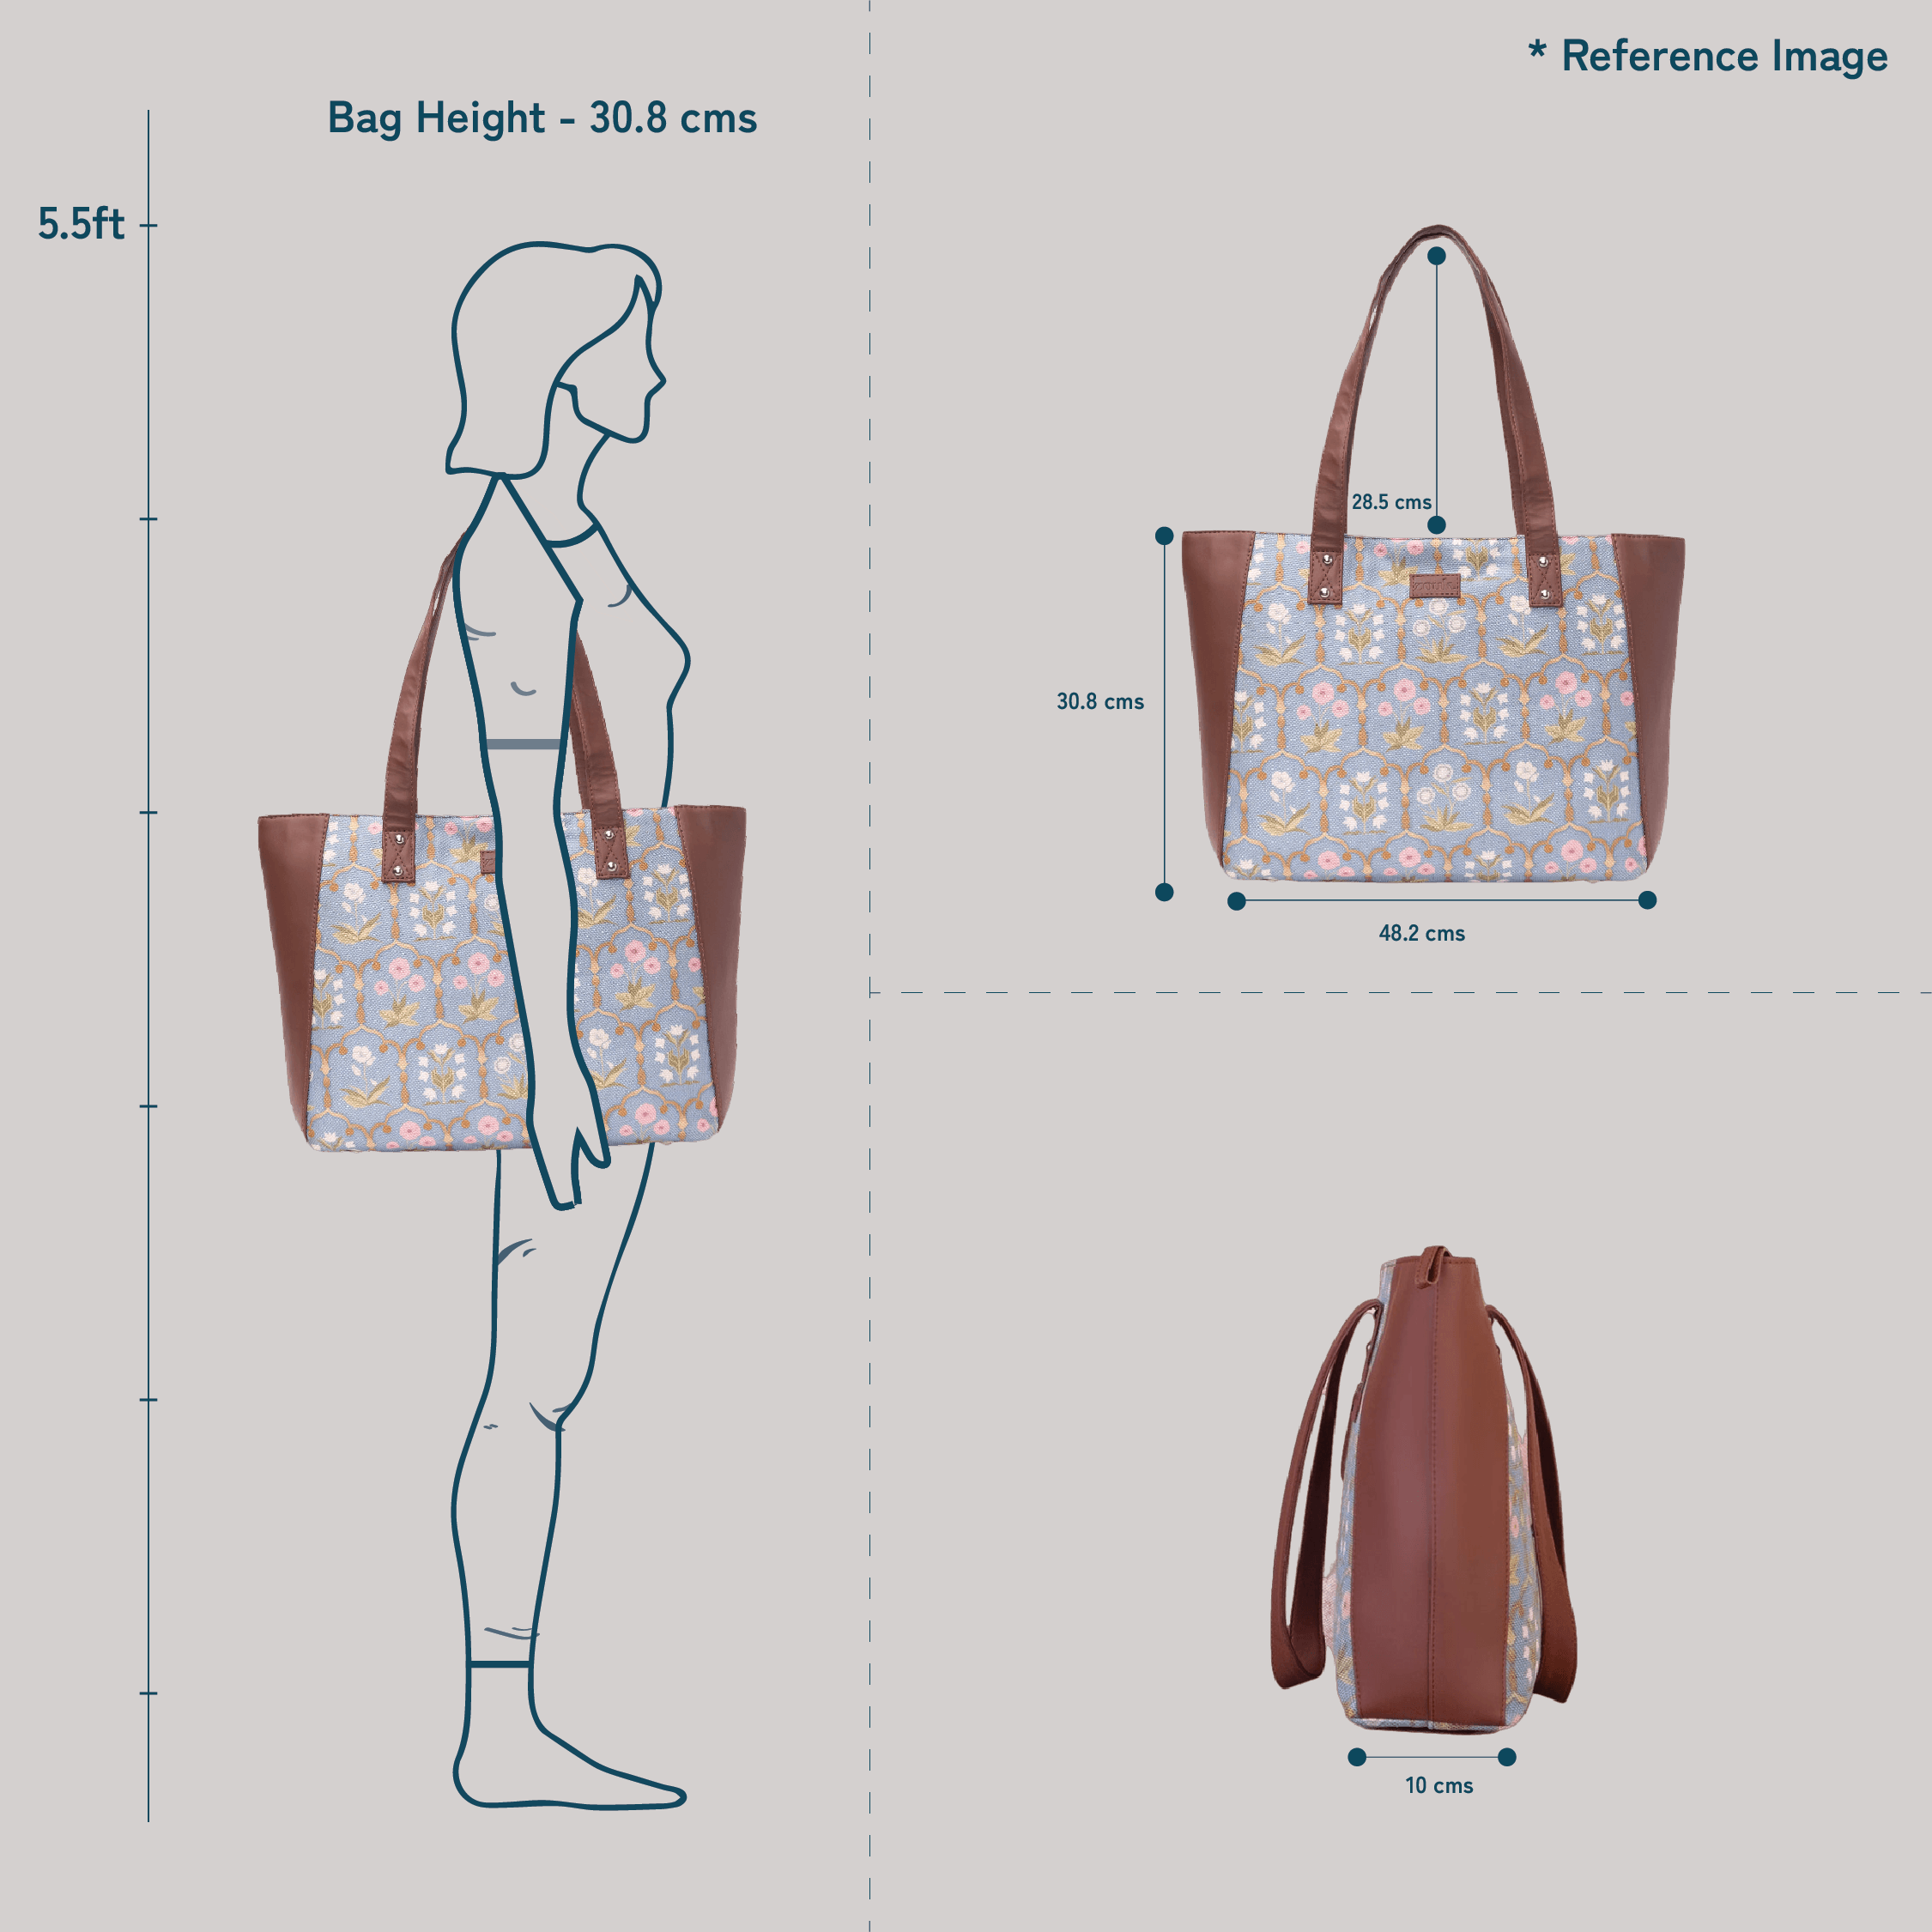 Mangalore Blossoms Side Tote Bag